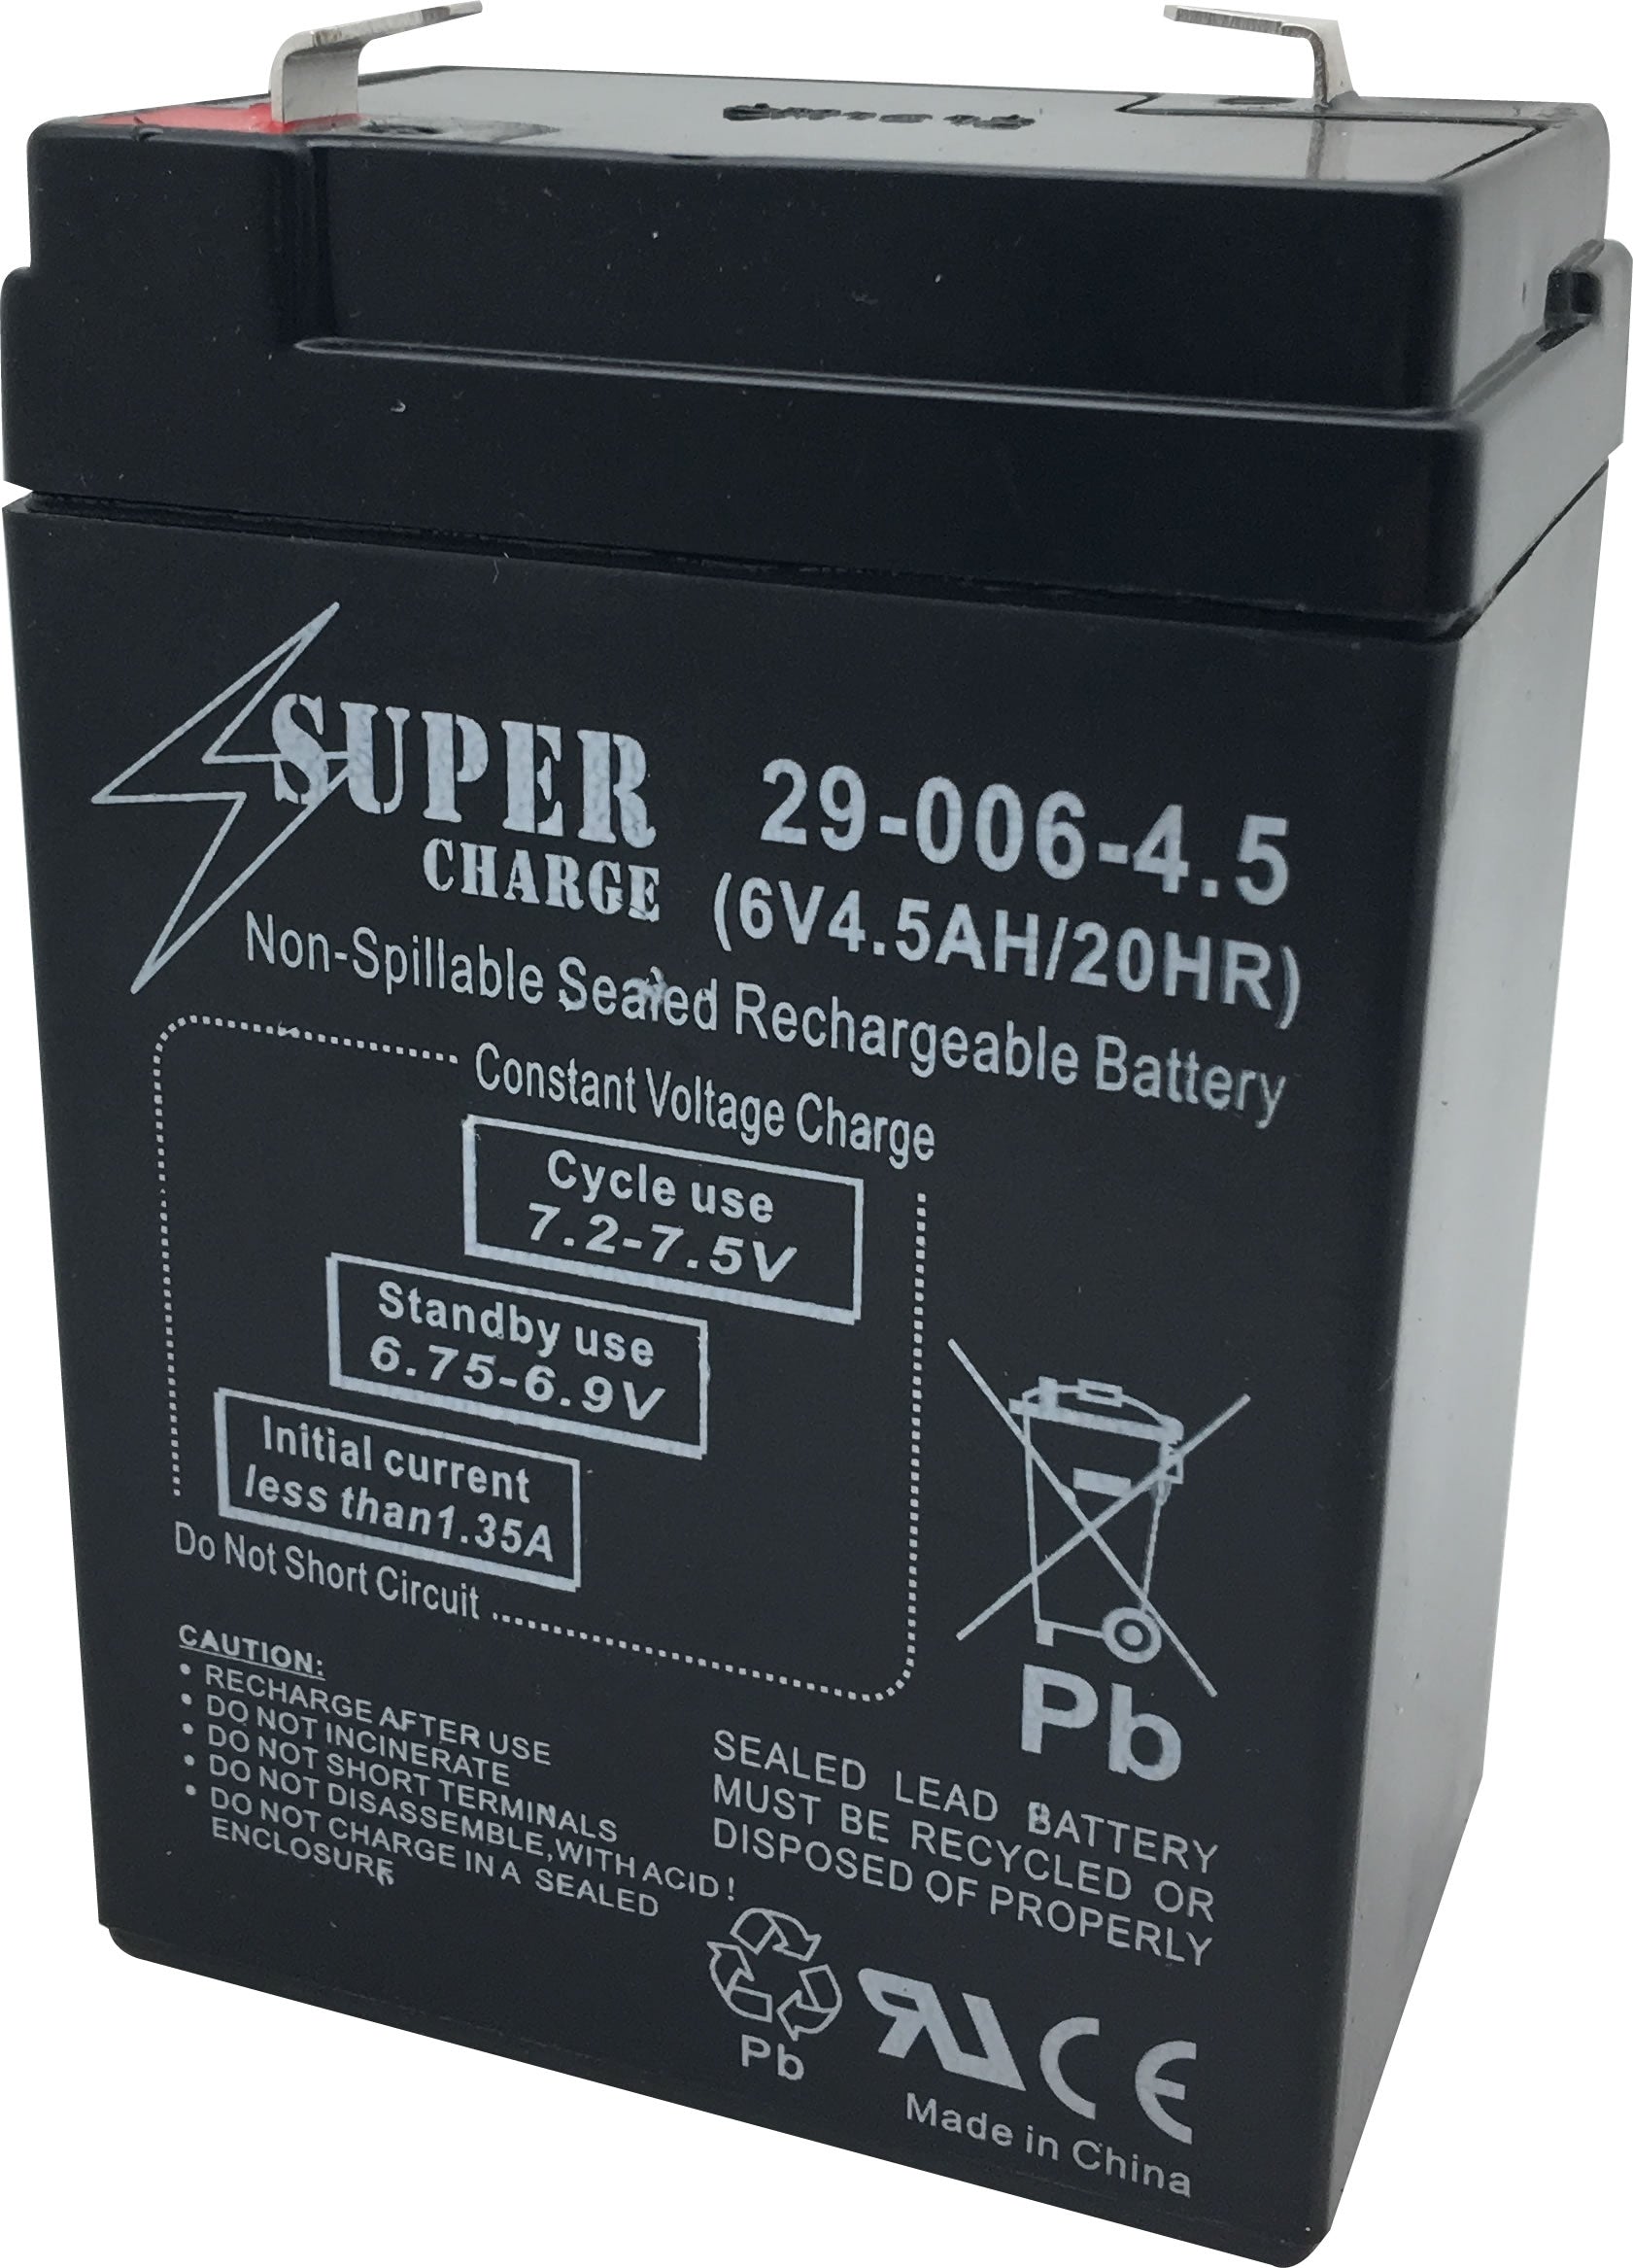 29-006-4.5 Rechargeable Battery 6V 4.5AH 20HR